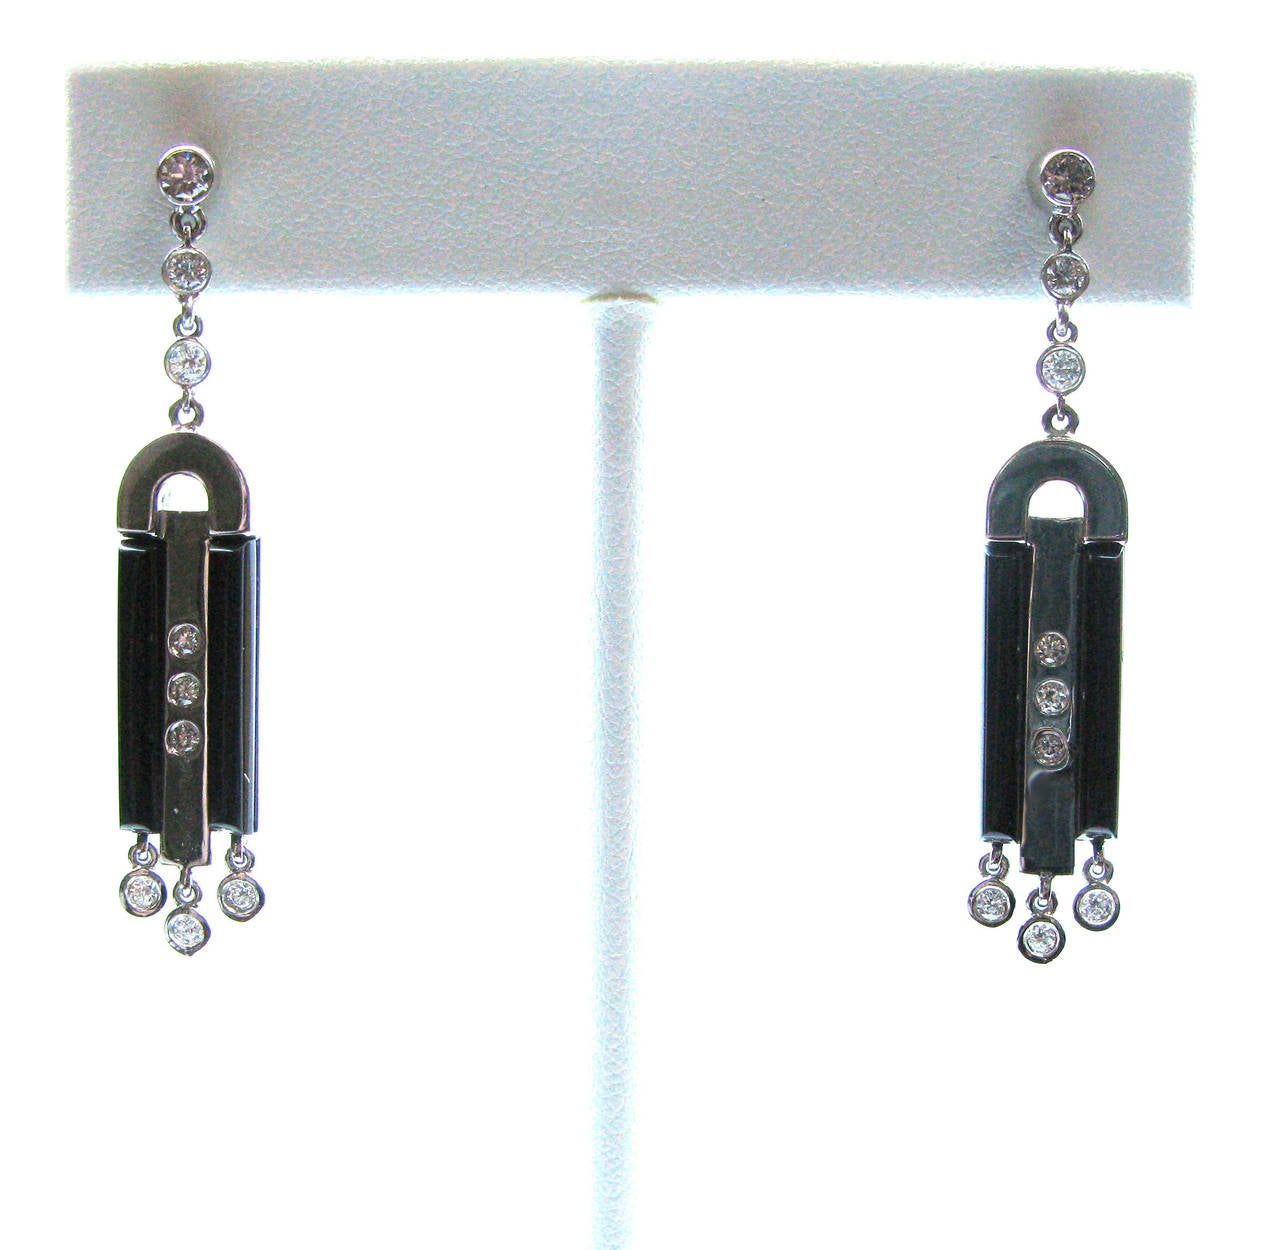 Uniquely designed diamond and onyx earrings in a distinct art deco style.  These 18kt white gold dangle earrings feature 12 H/I color, VS clarity round brilliant bezel set diamonds and 6 flush set diamonds and 4 onyx baguettes.